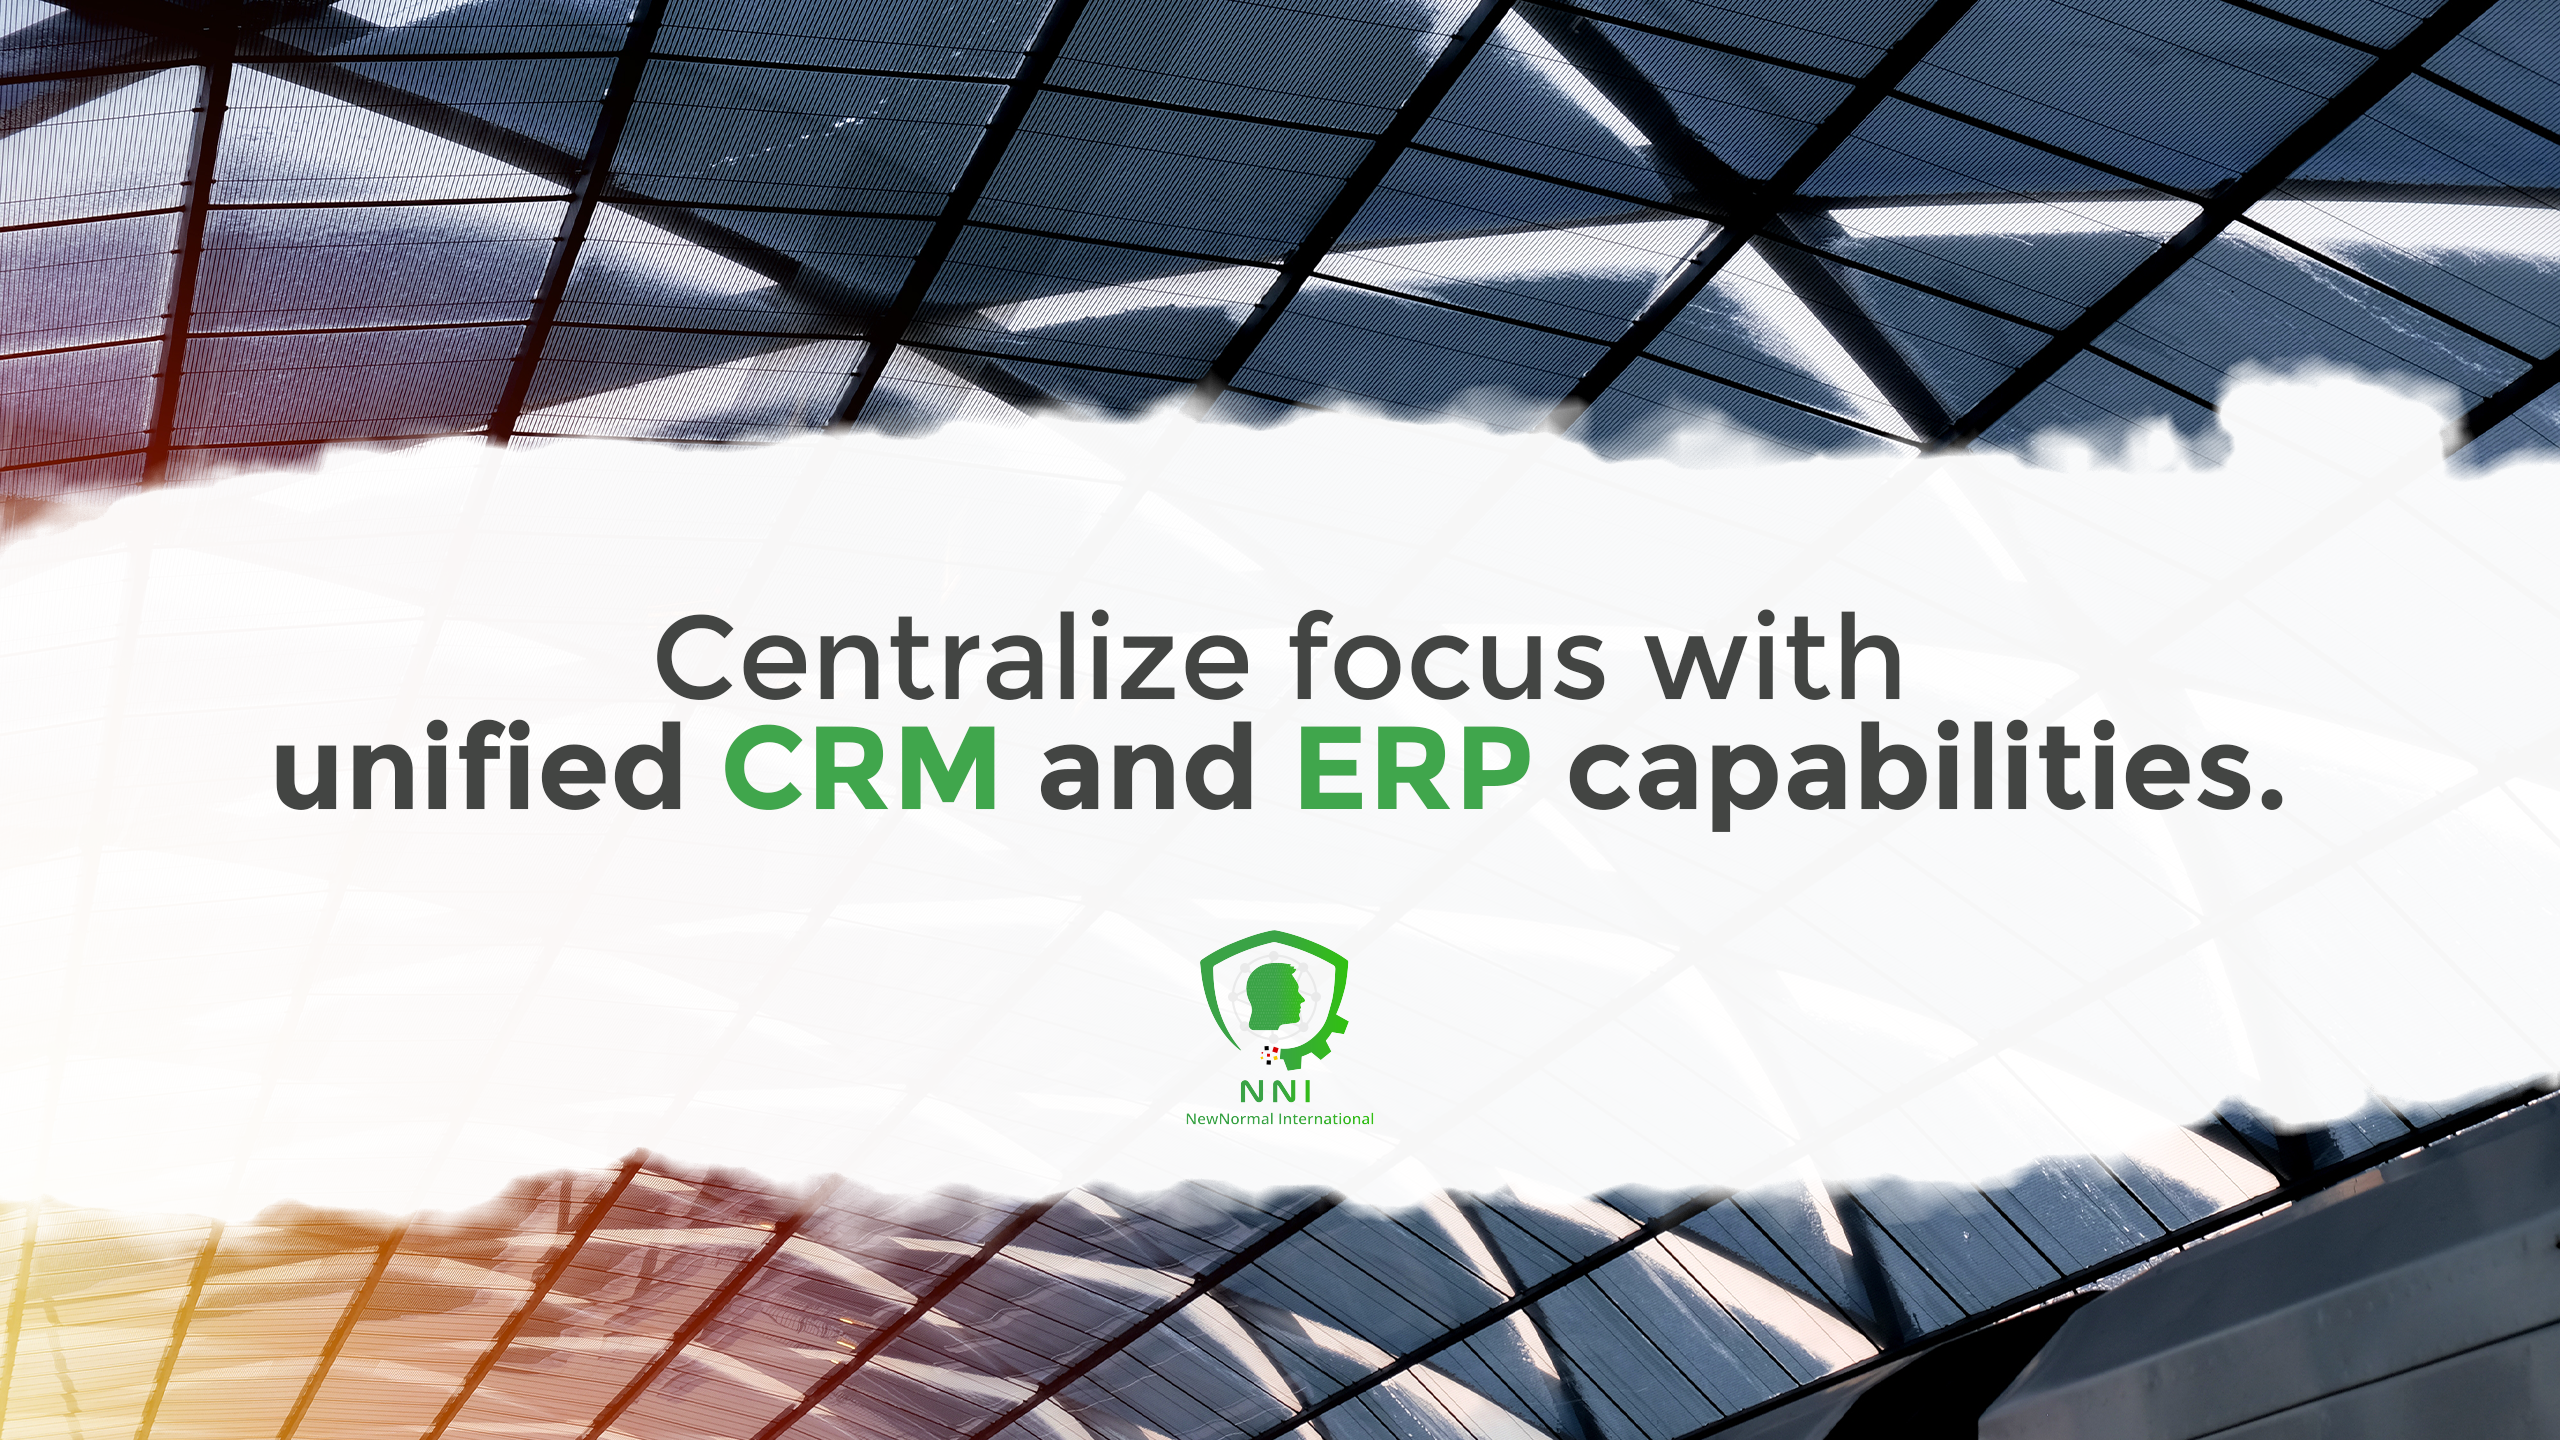 Centralize focus with unified CRM and ERP capabilities.